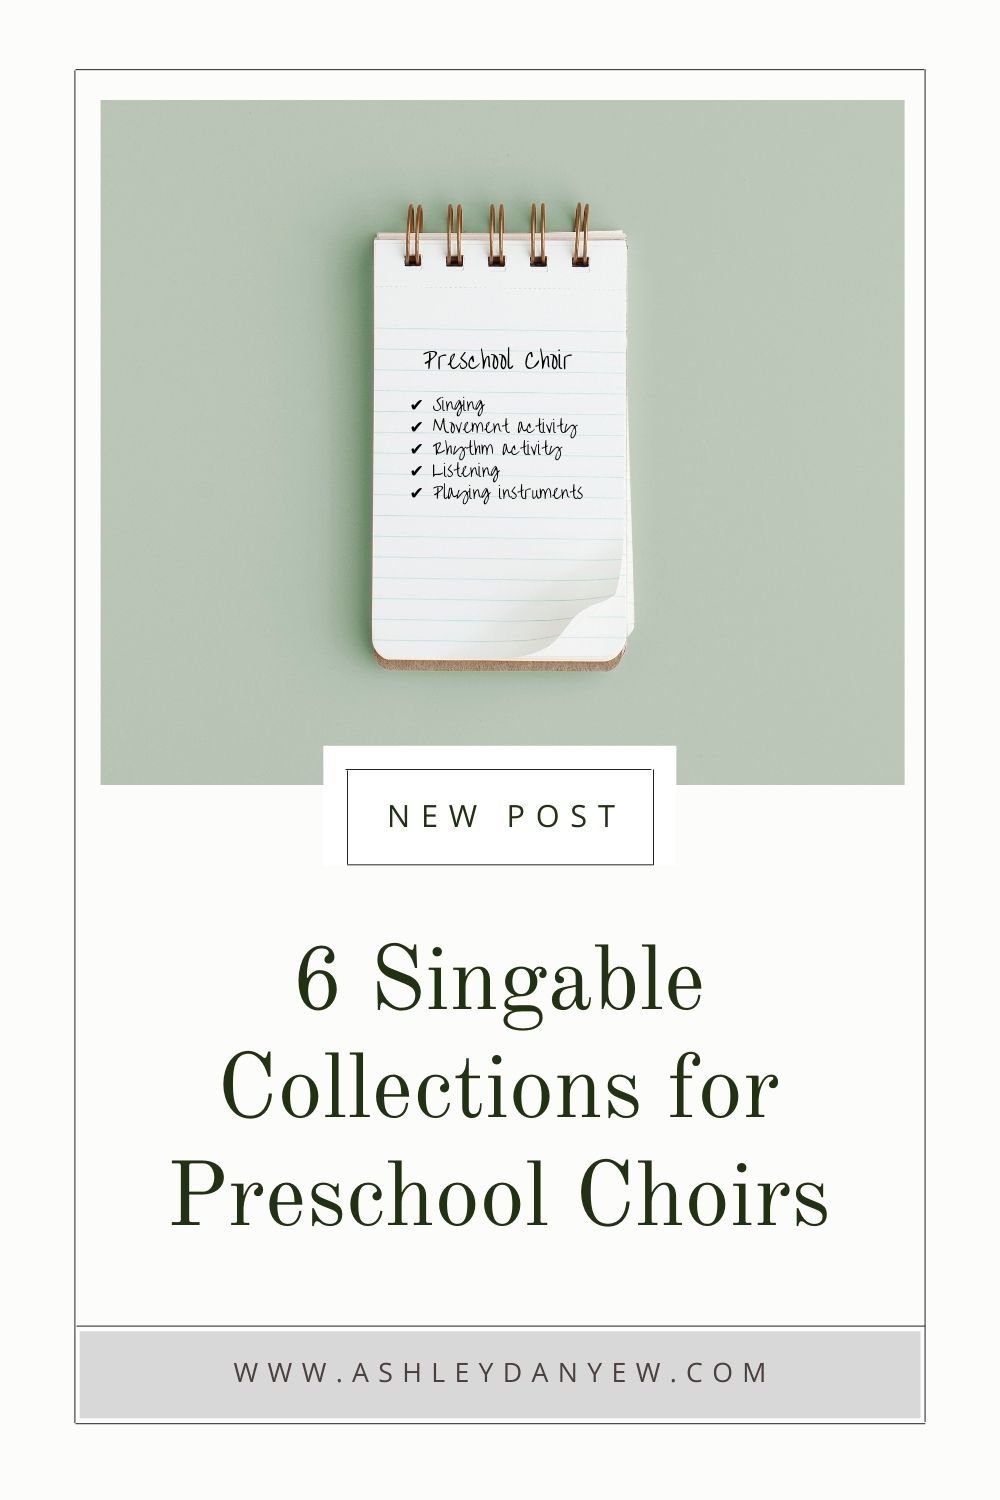 6 Singable Collections for Preschool Choirs